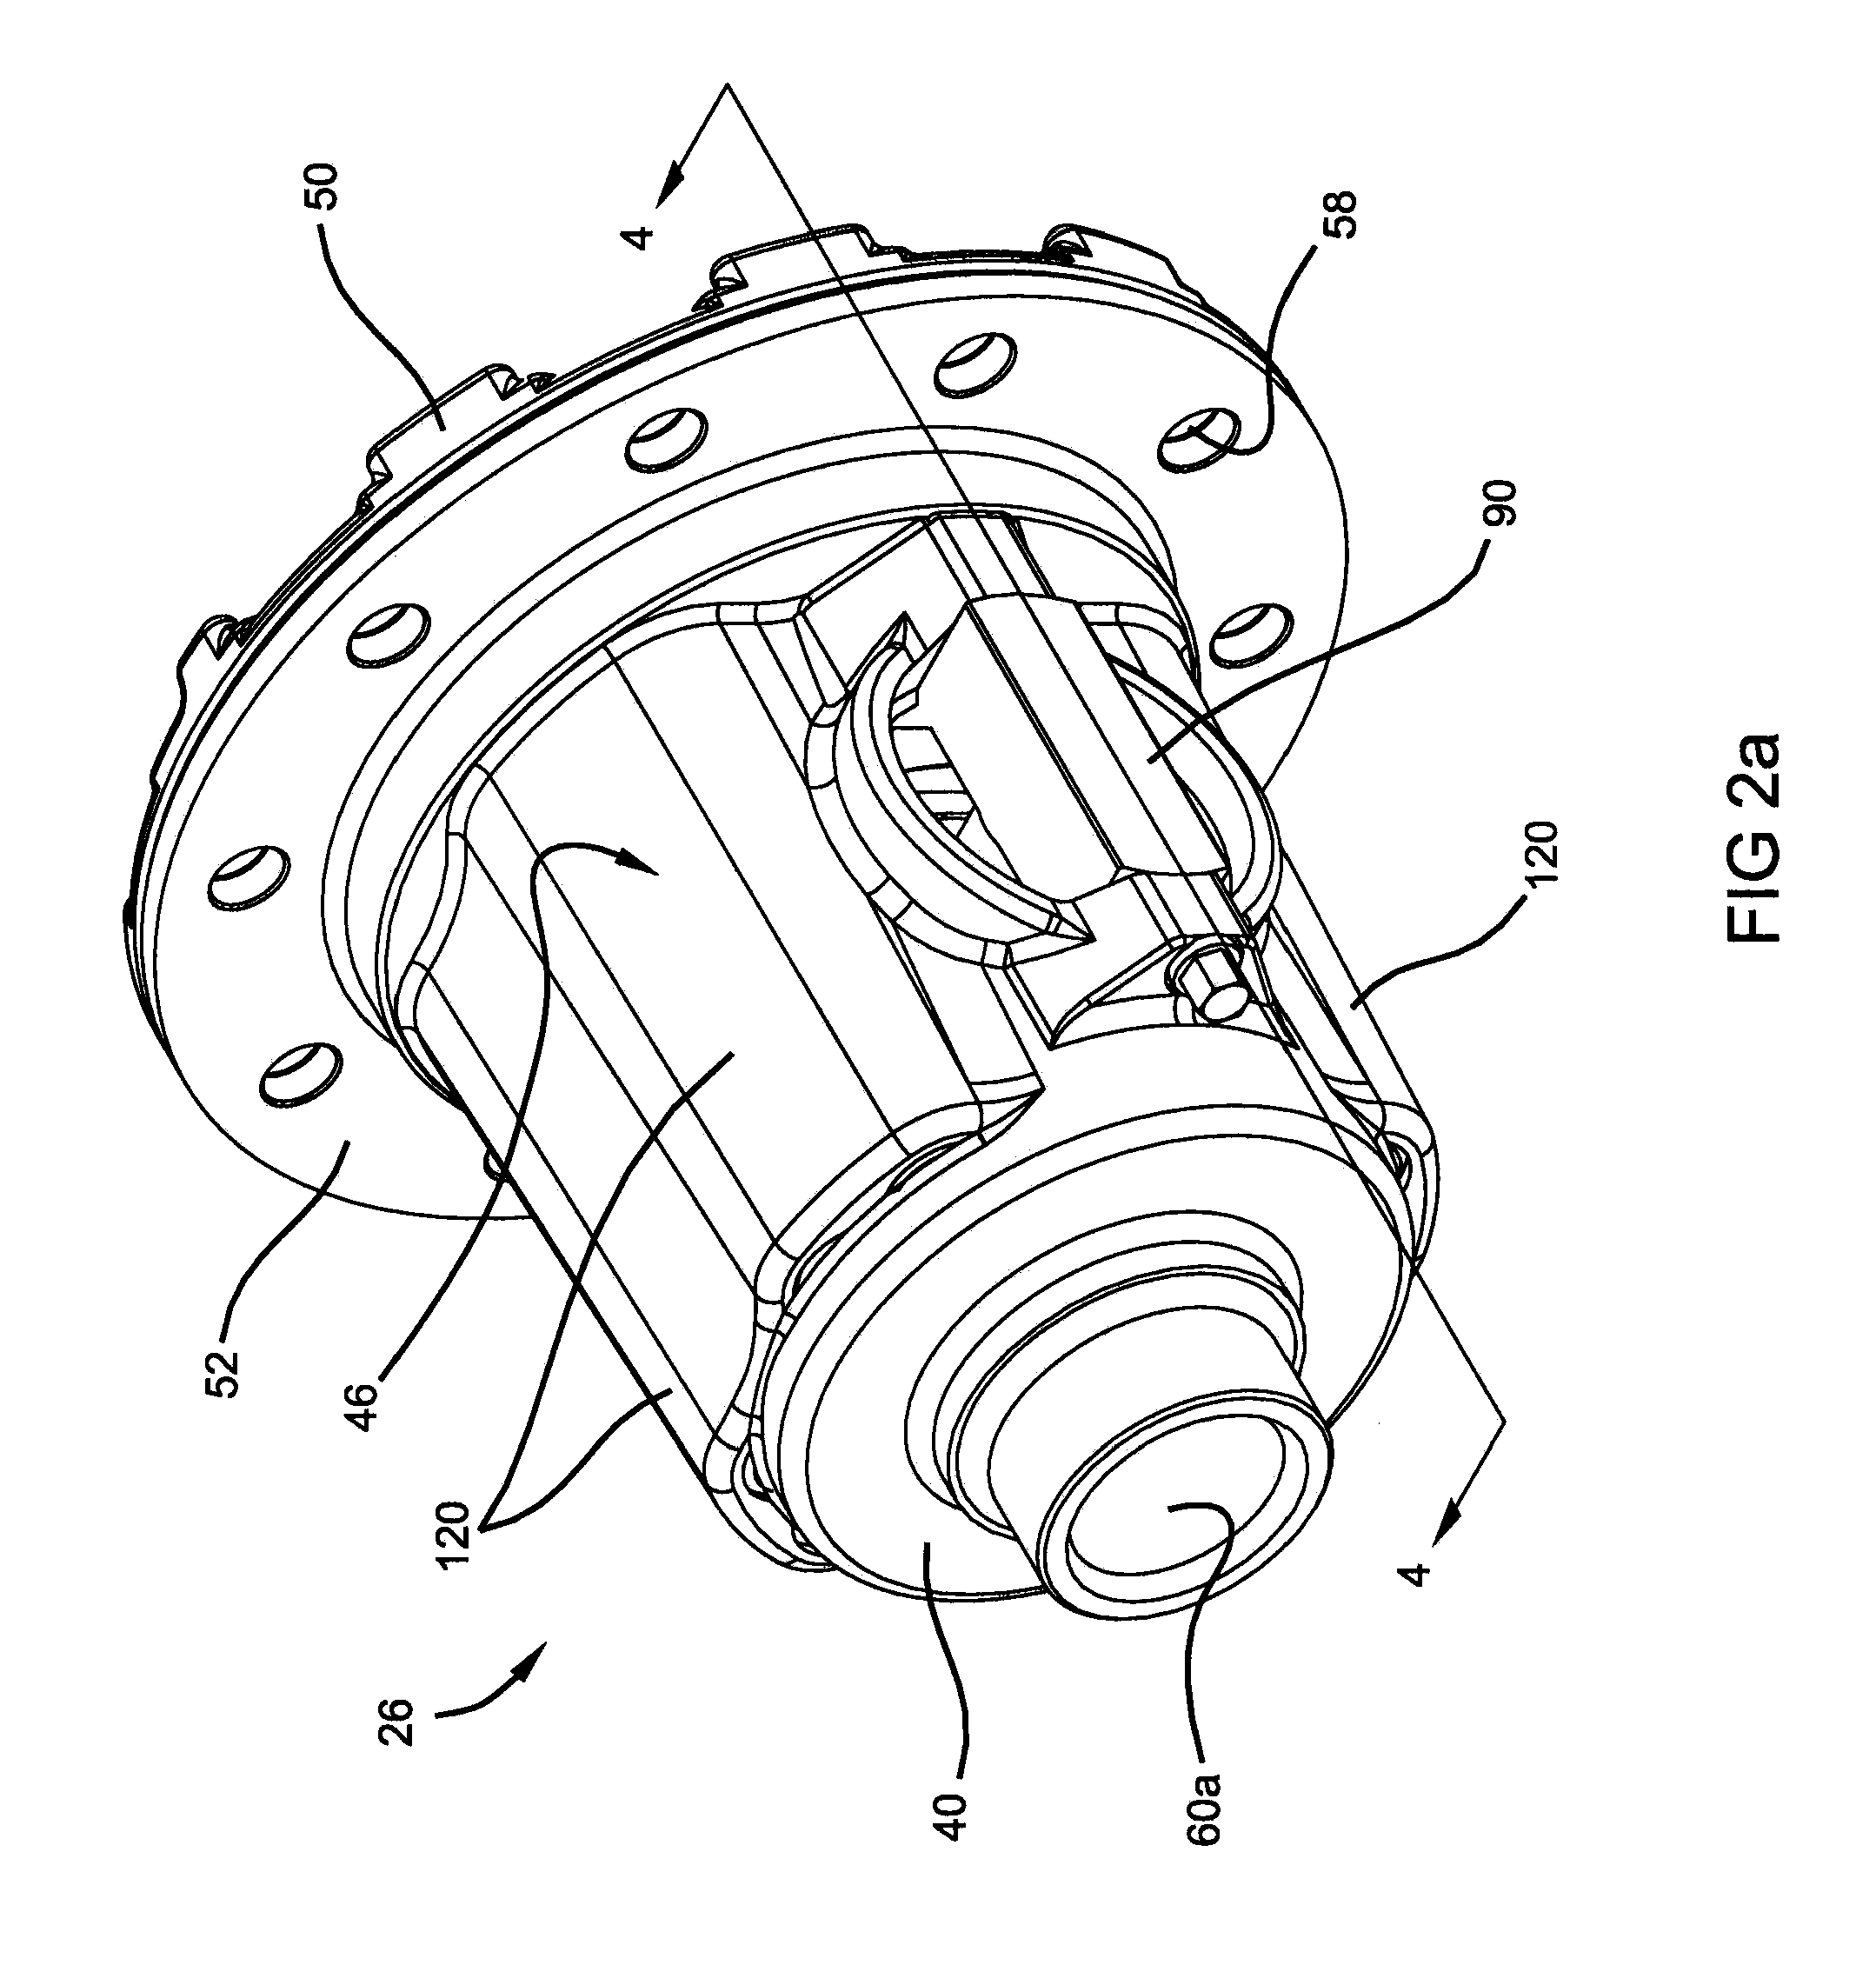 Spacer pin arrangement for helical gear differential